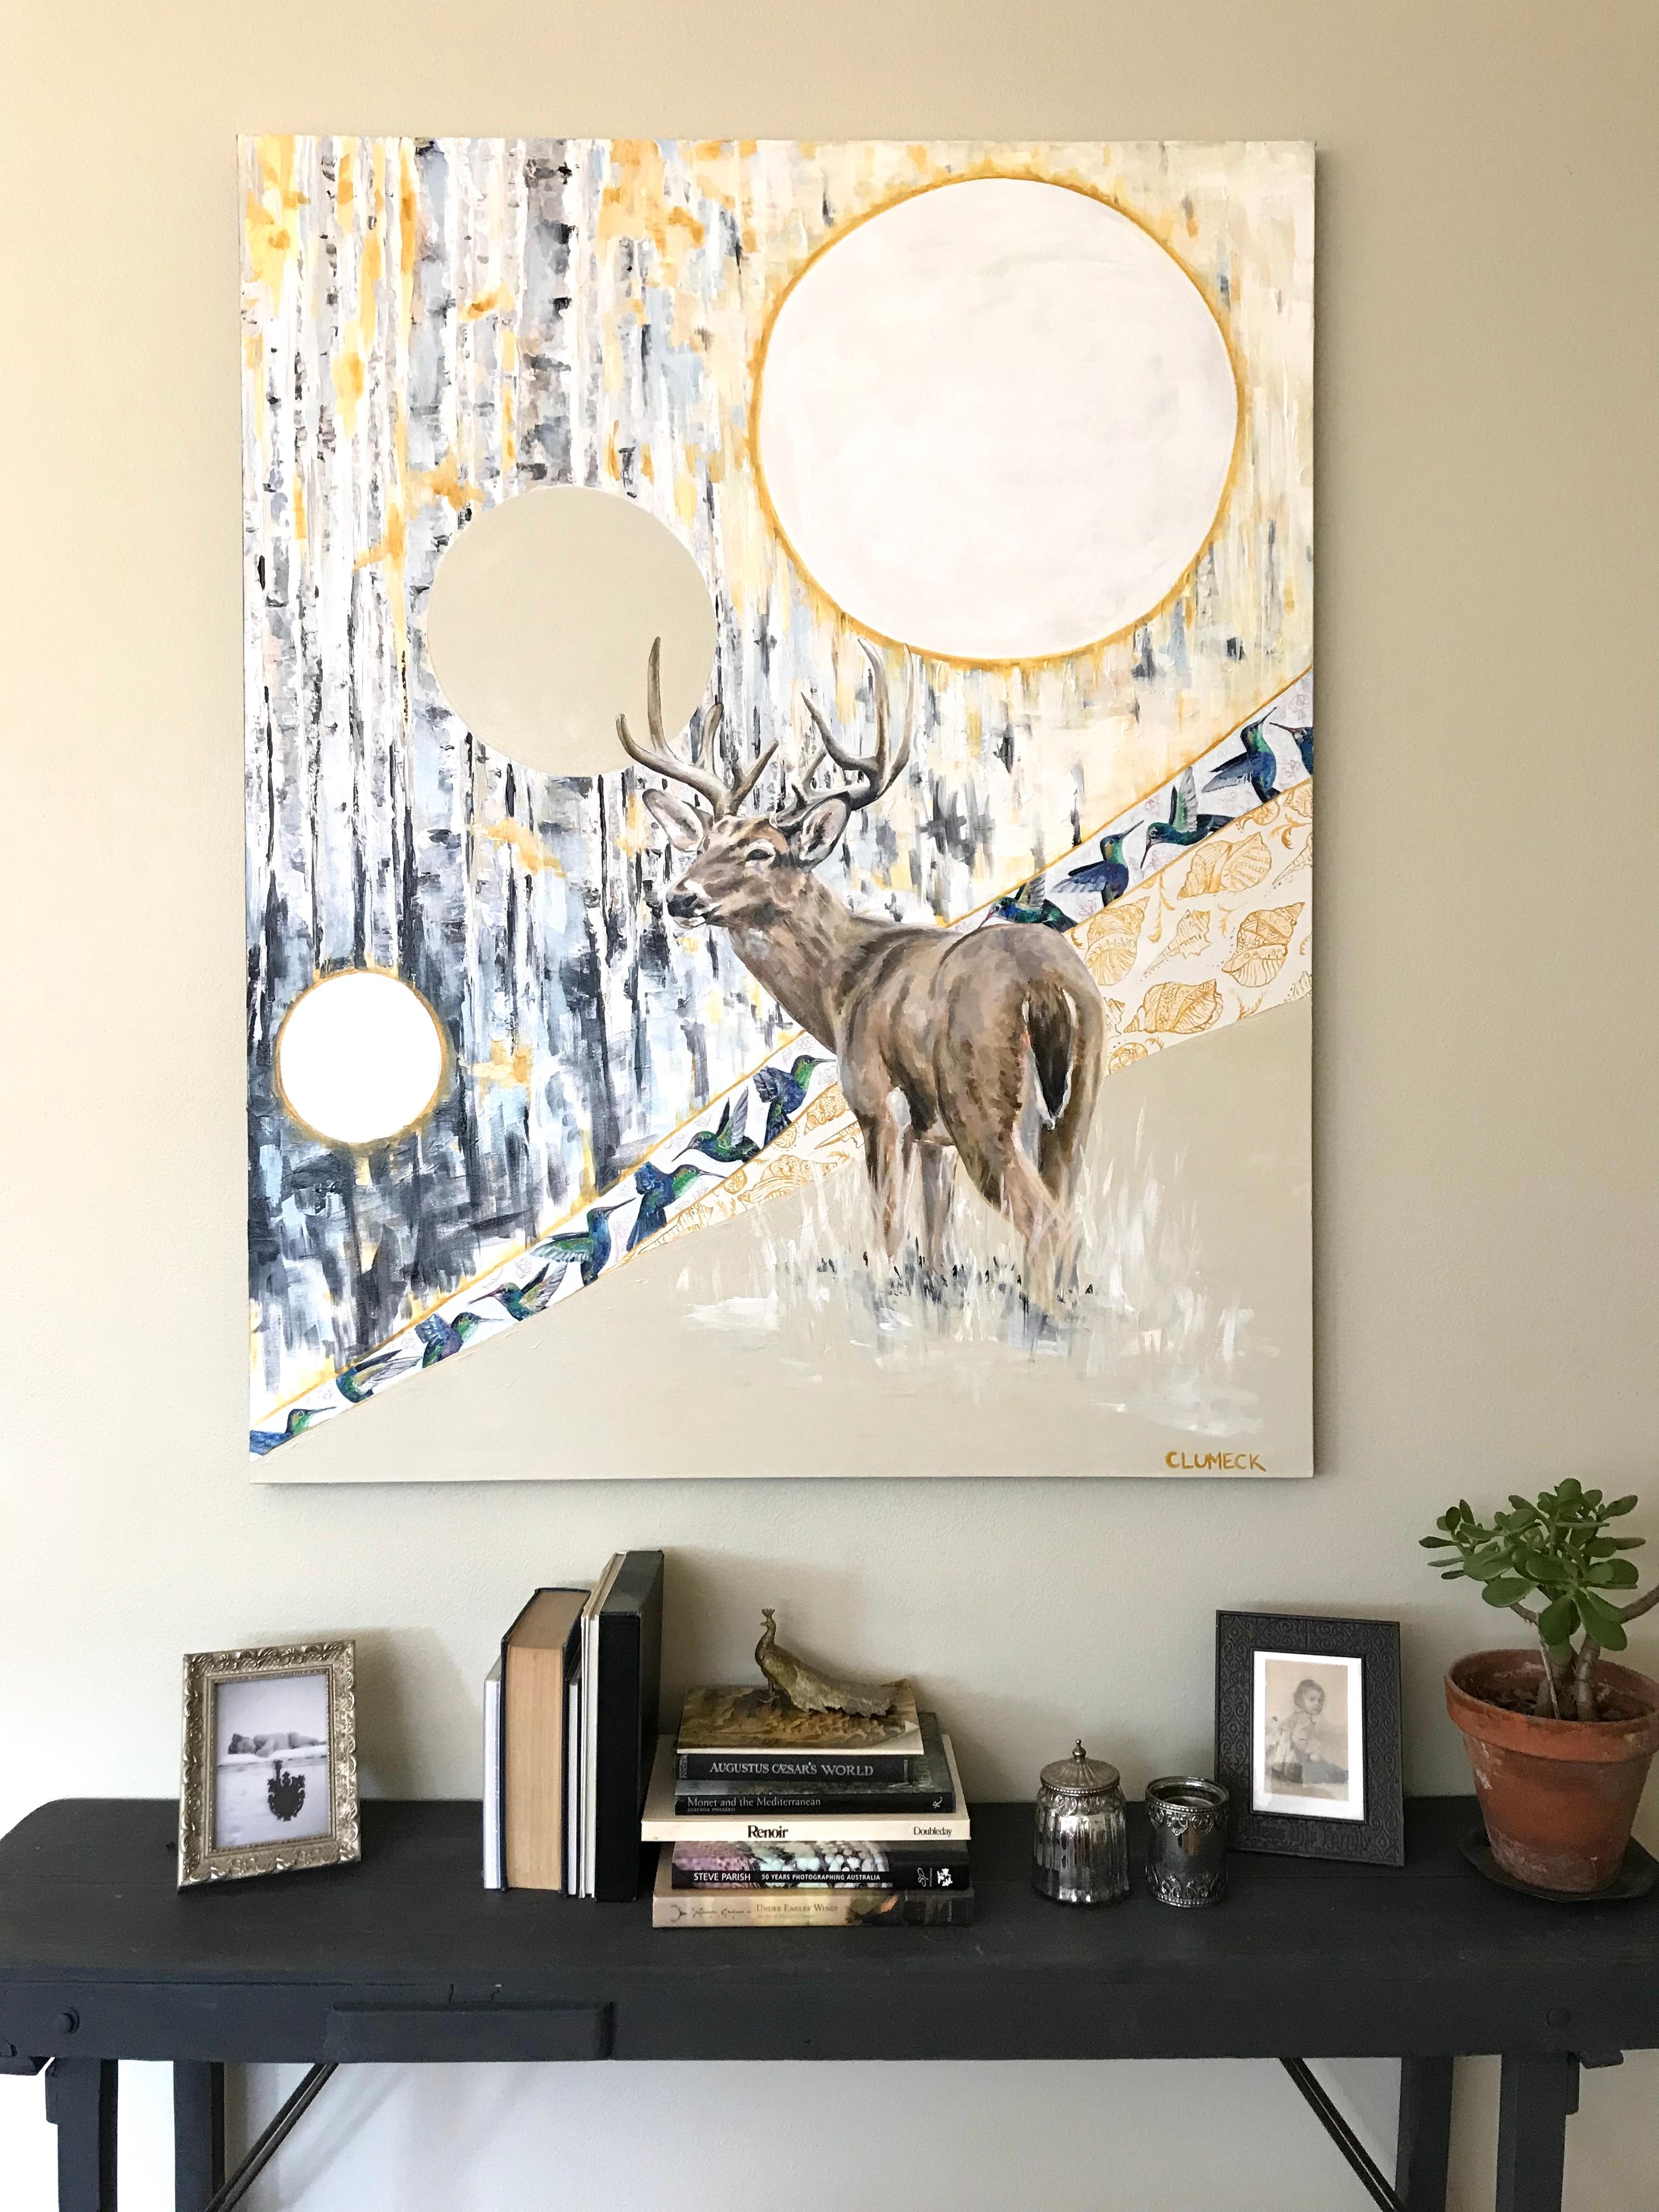 Under the Aspens, Original Painting - Contemporary Mixed Media Art by Alana Clumeck